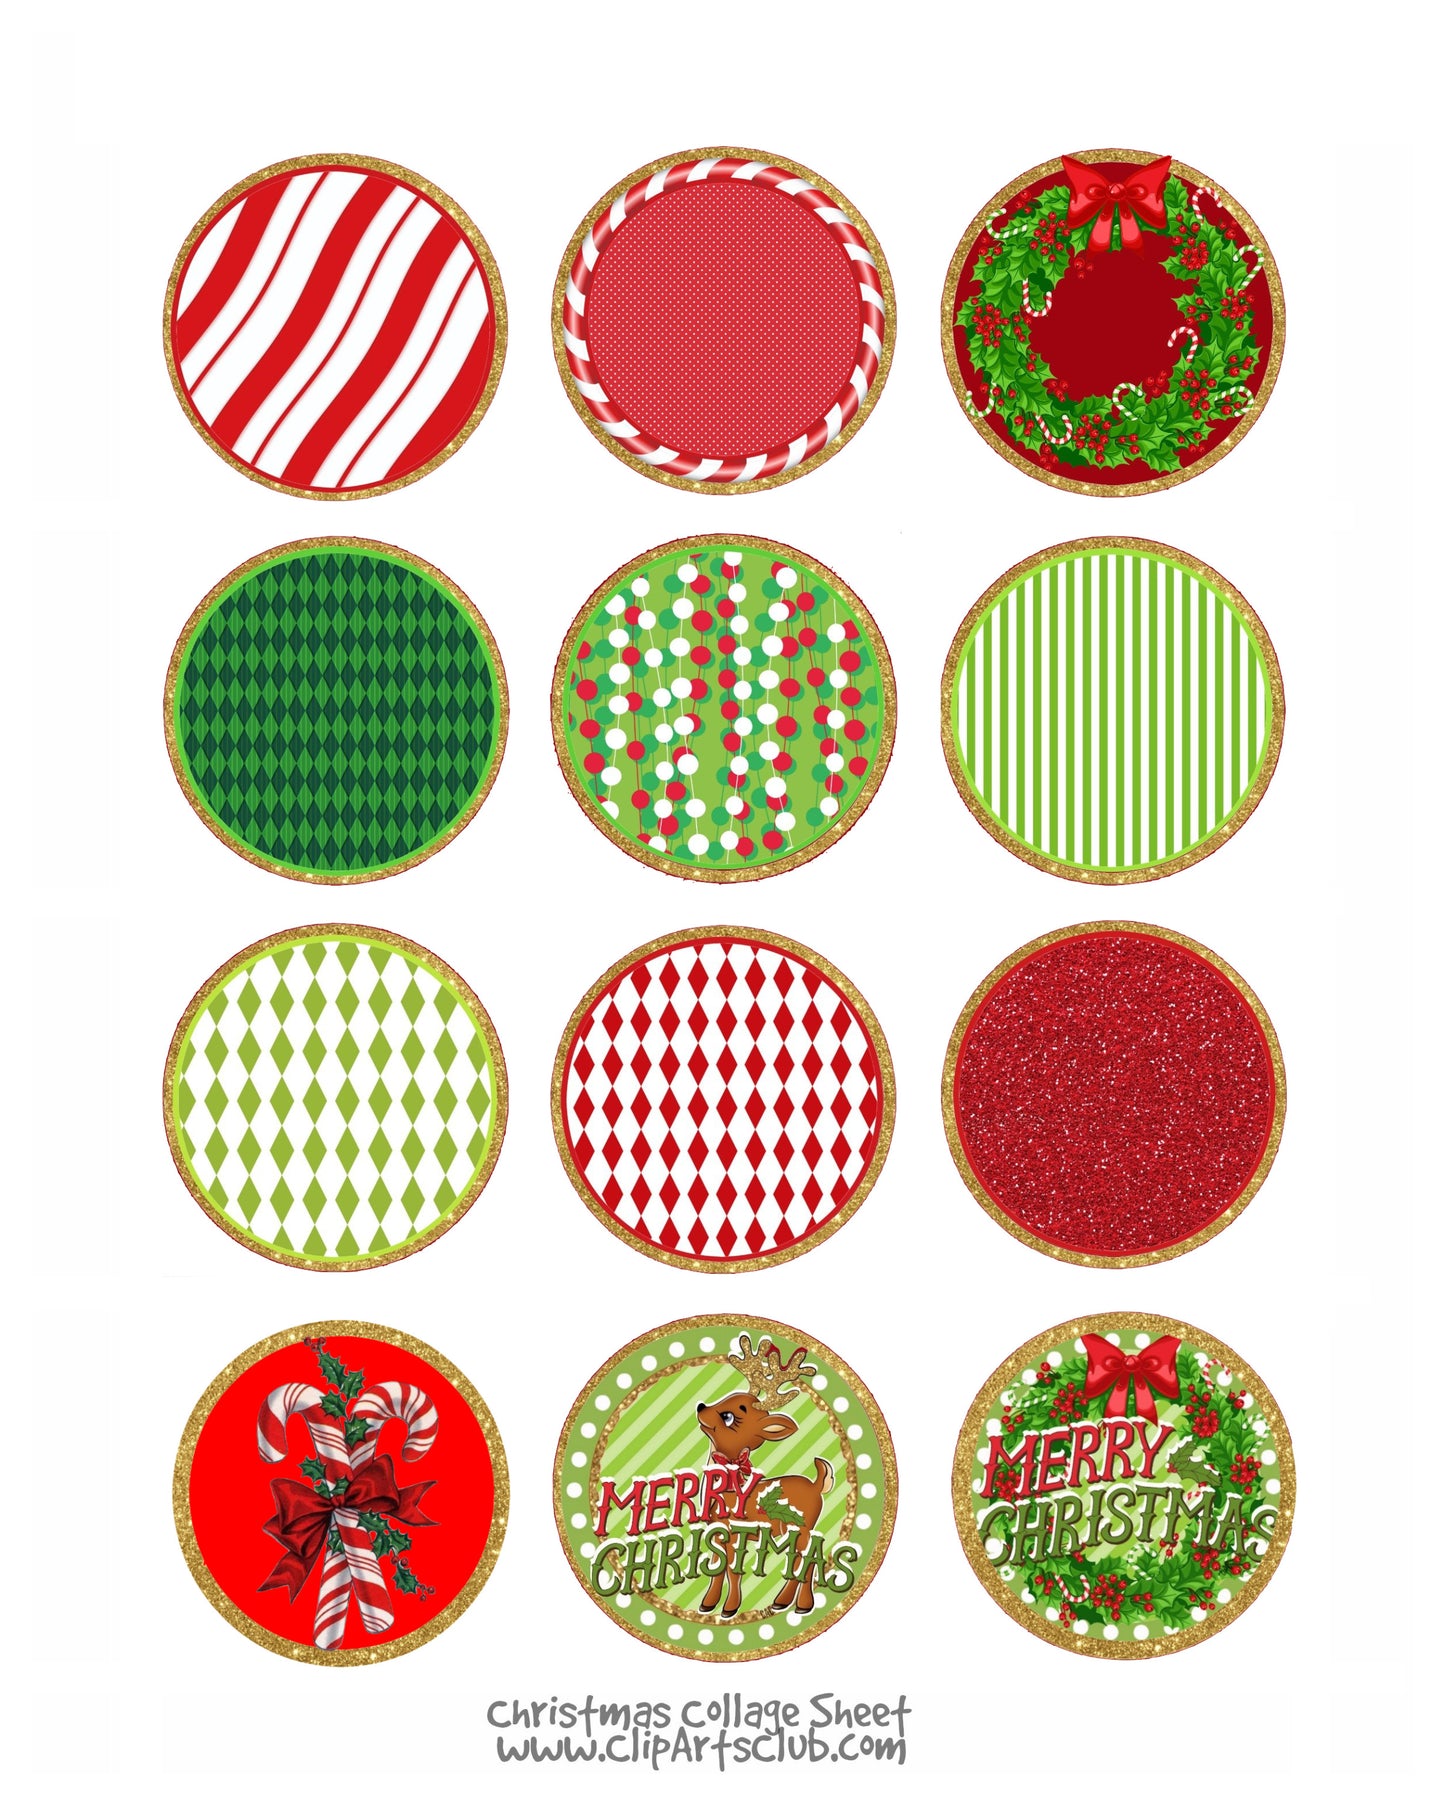 12 Different Christmas Circles Trimmed in Gold Collage Sheet